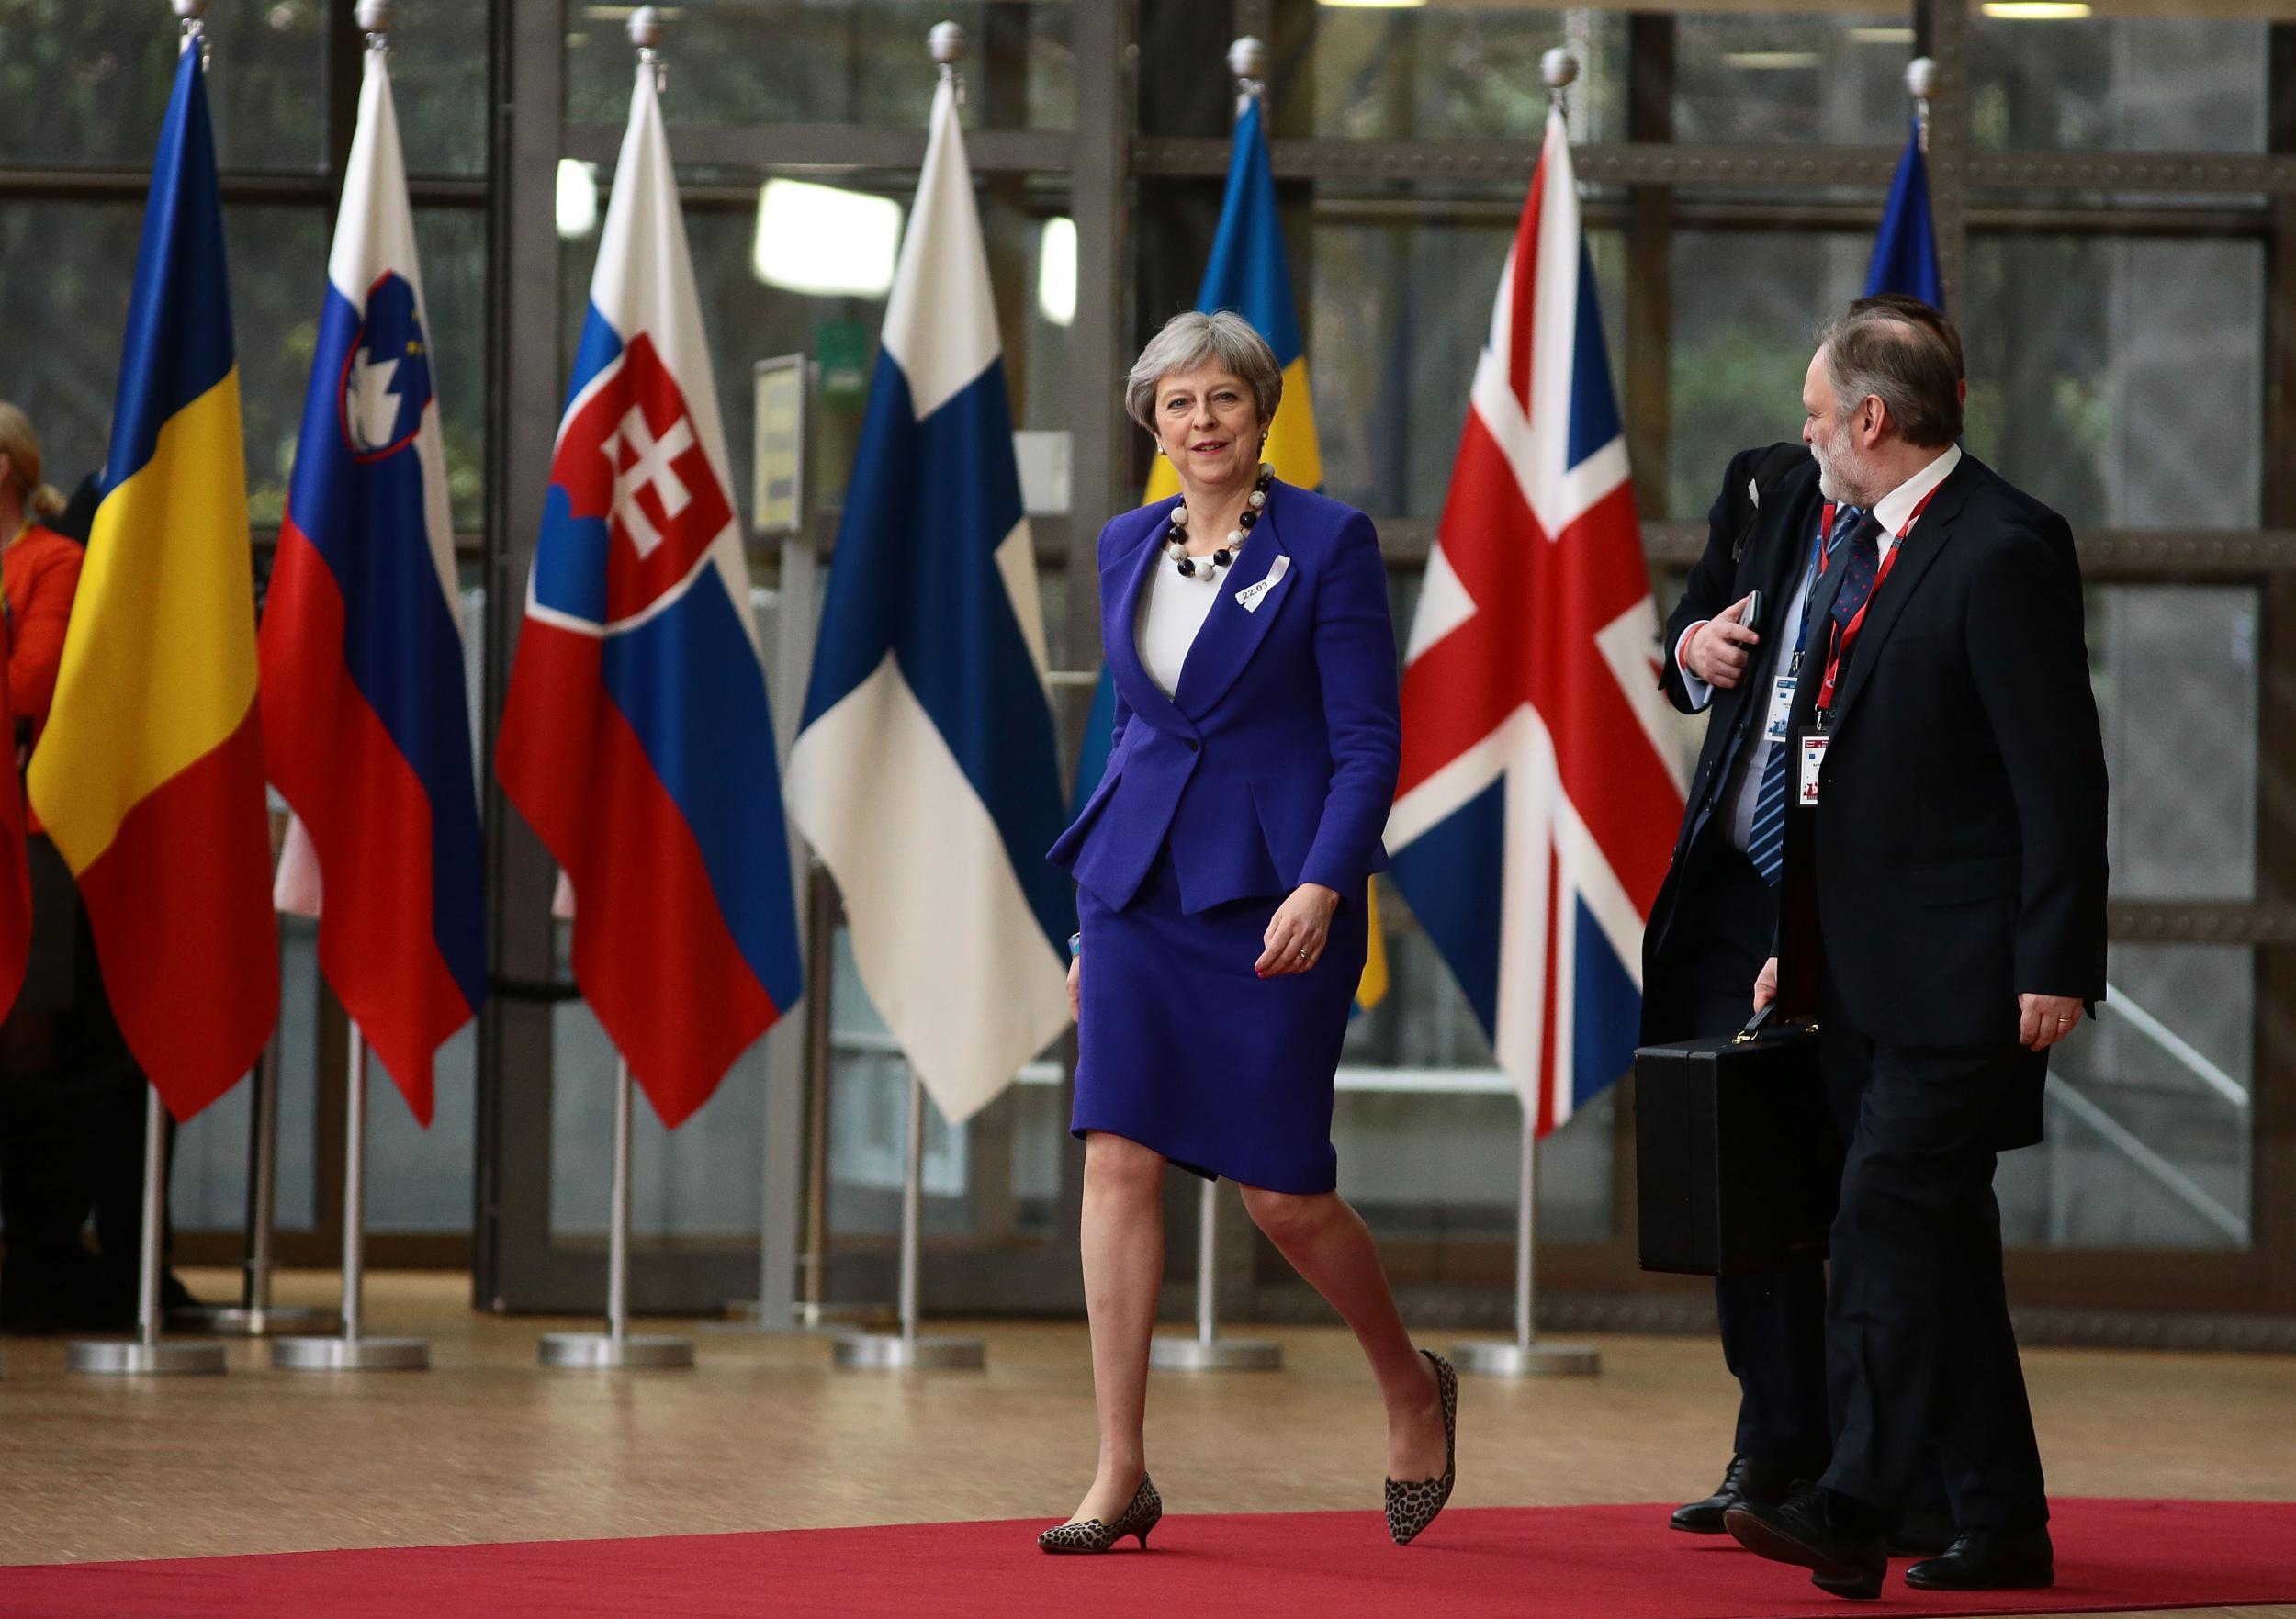 UK diplomacy will probably have to work much harder after we ‘take back control’ from the EU